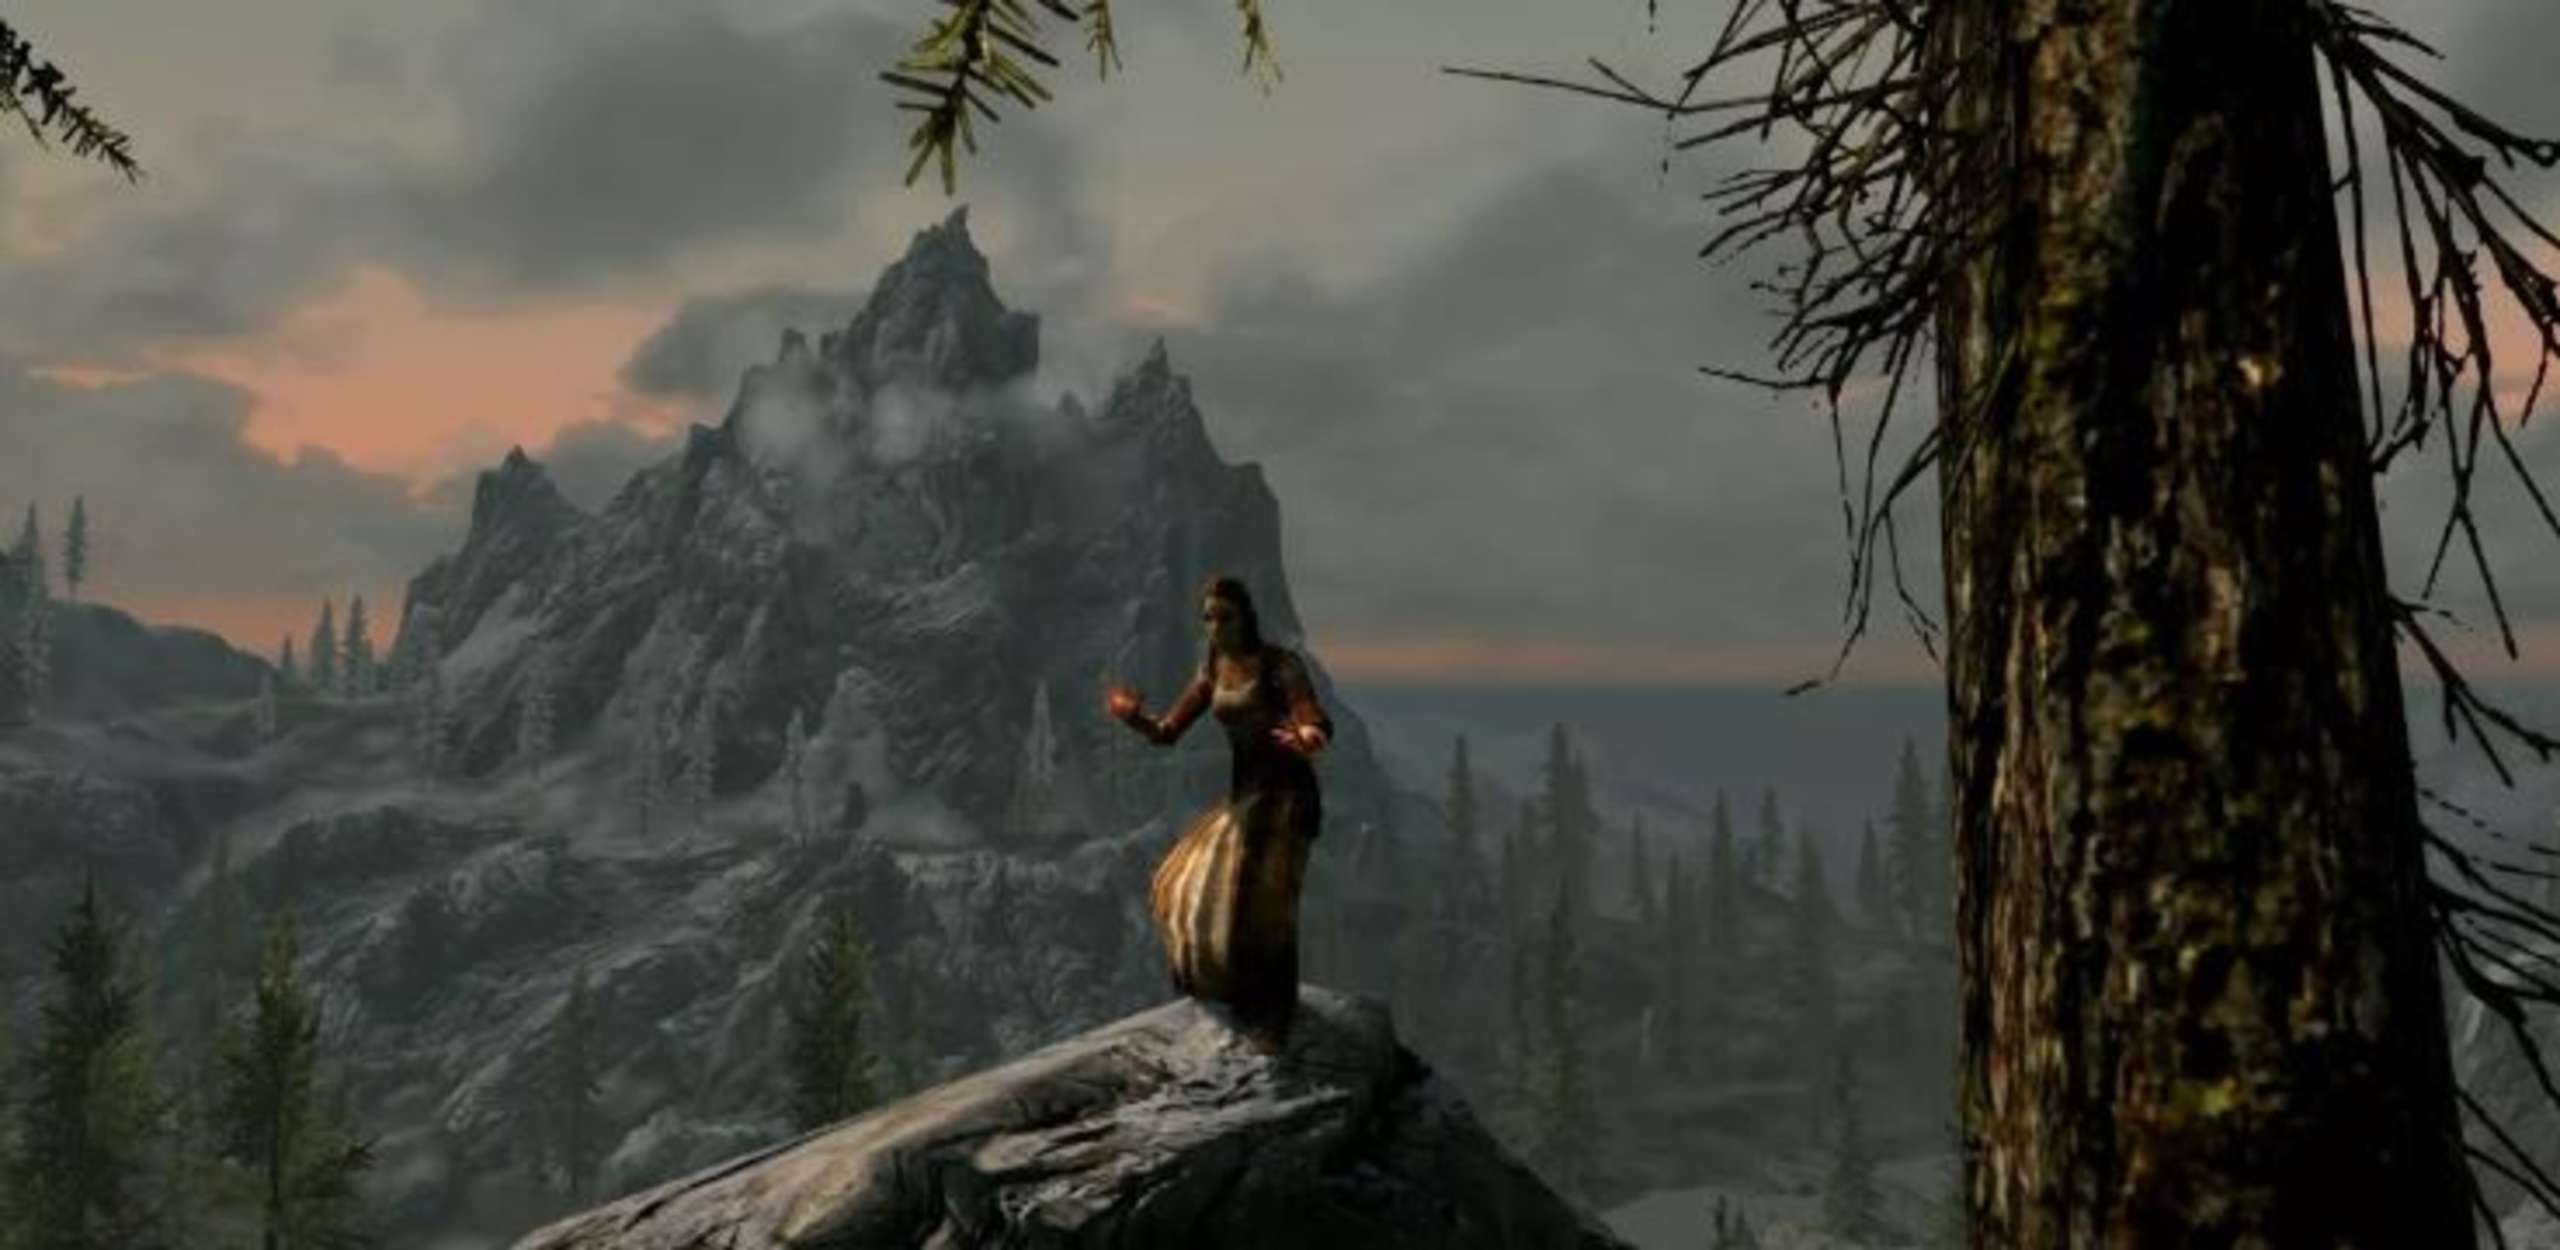 In Elder Scrolls 5: Skyrim, The Player Decides To Spend Time With A Bandit They Defeated Using Illusion Magic So That They Can Find Out More About Her Backstory